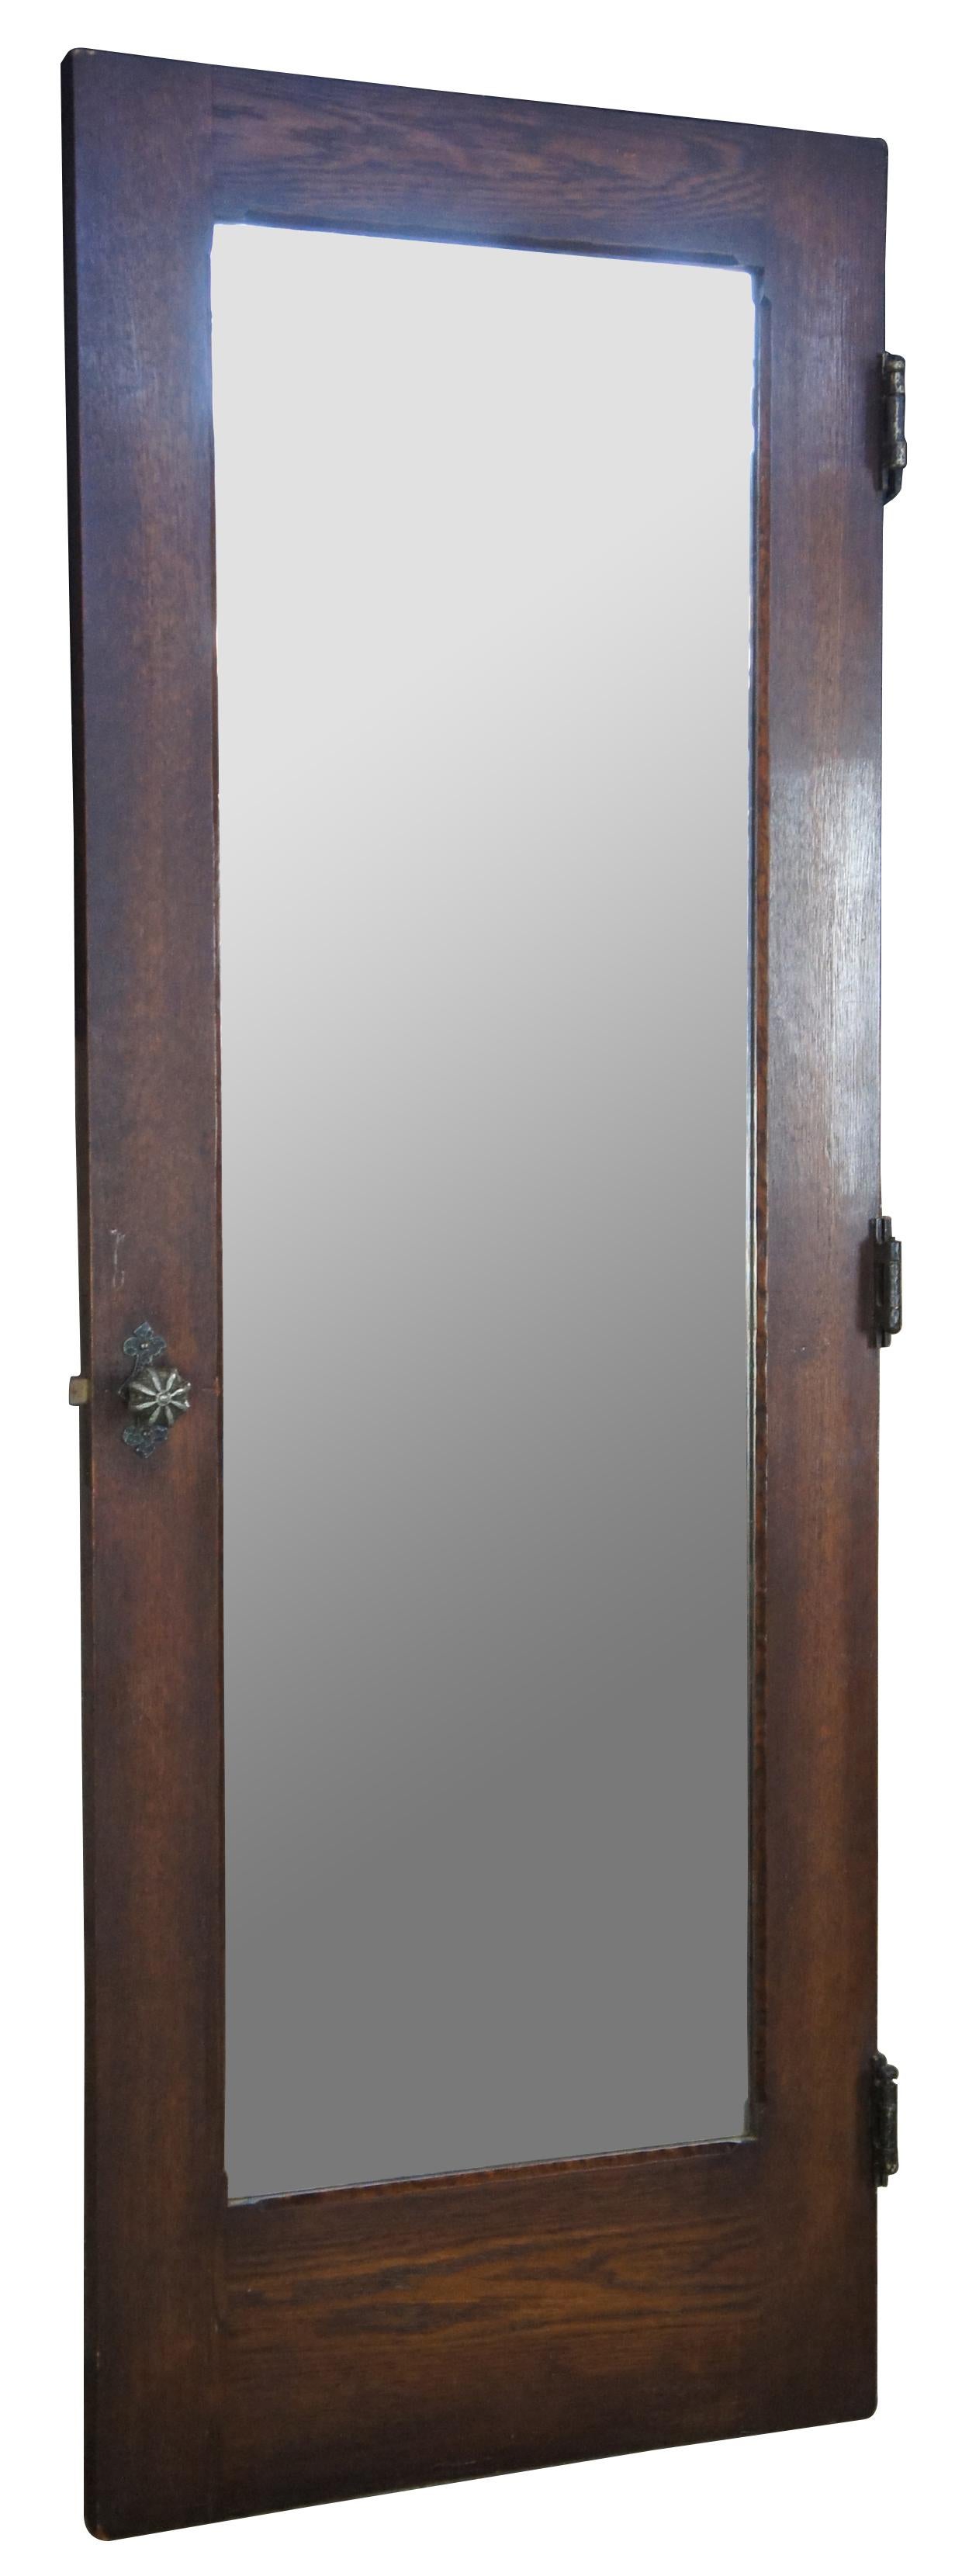 Early 20th century oak door. Features a large central mirror and Spanish Revival hammered hardware. Reclaimed from one of the first homes built in oakwood, Ohio by Harry I Schenck, circa early 1900s. Great for use as a dressing mirror. 5 available.